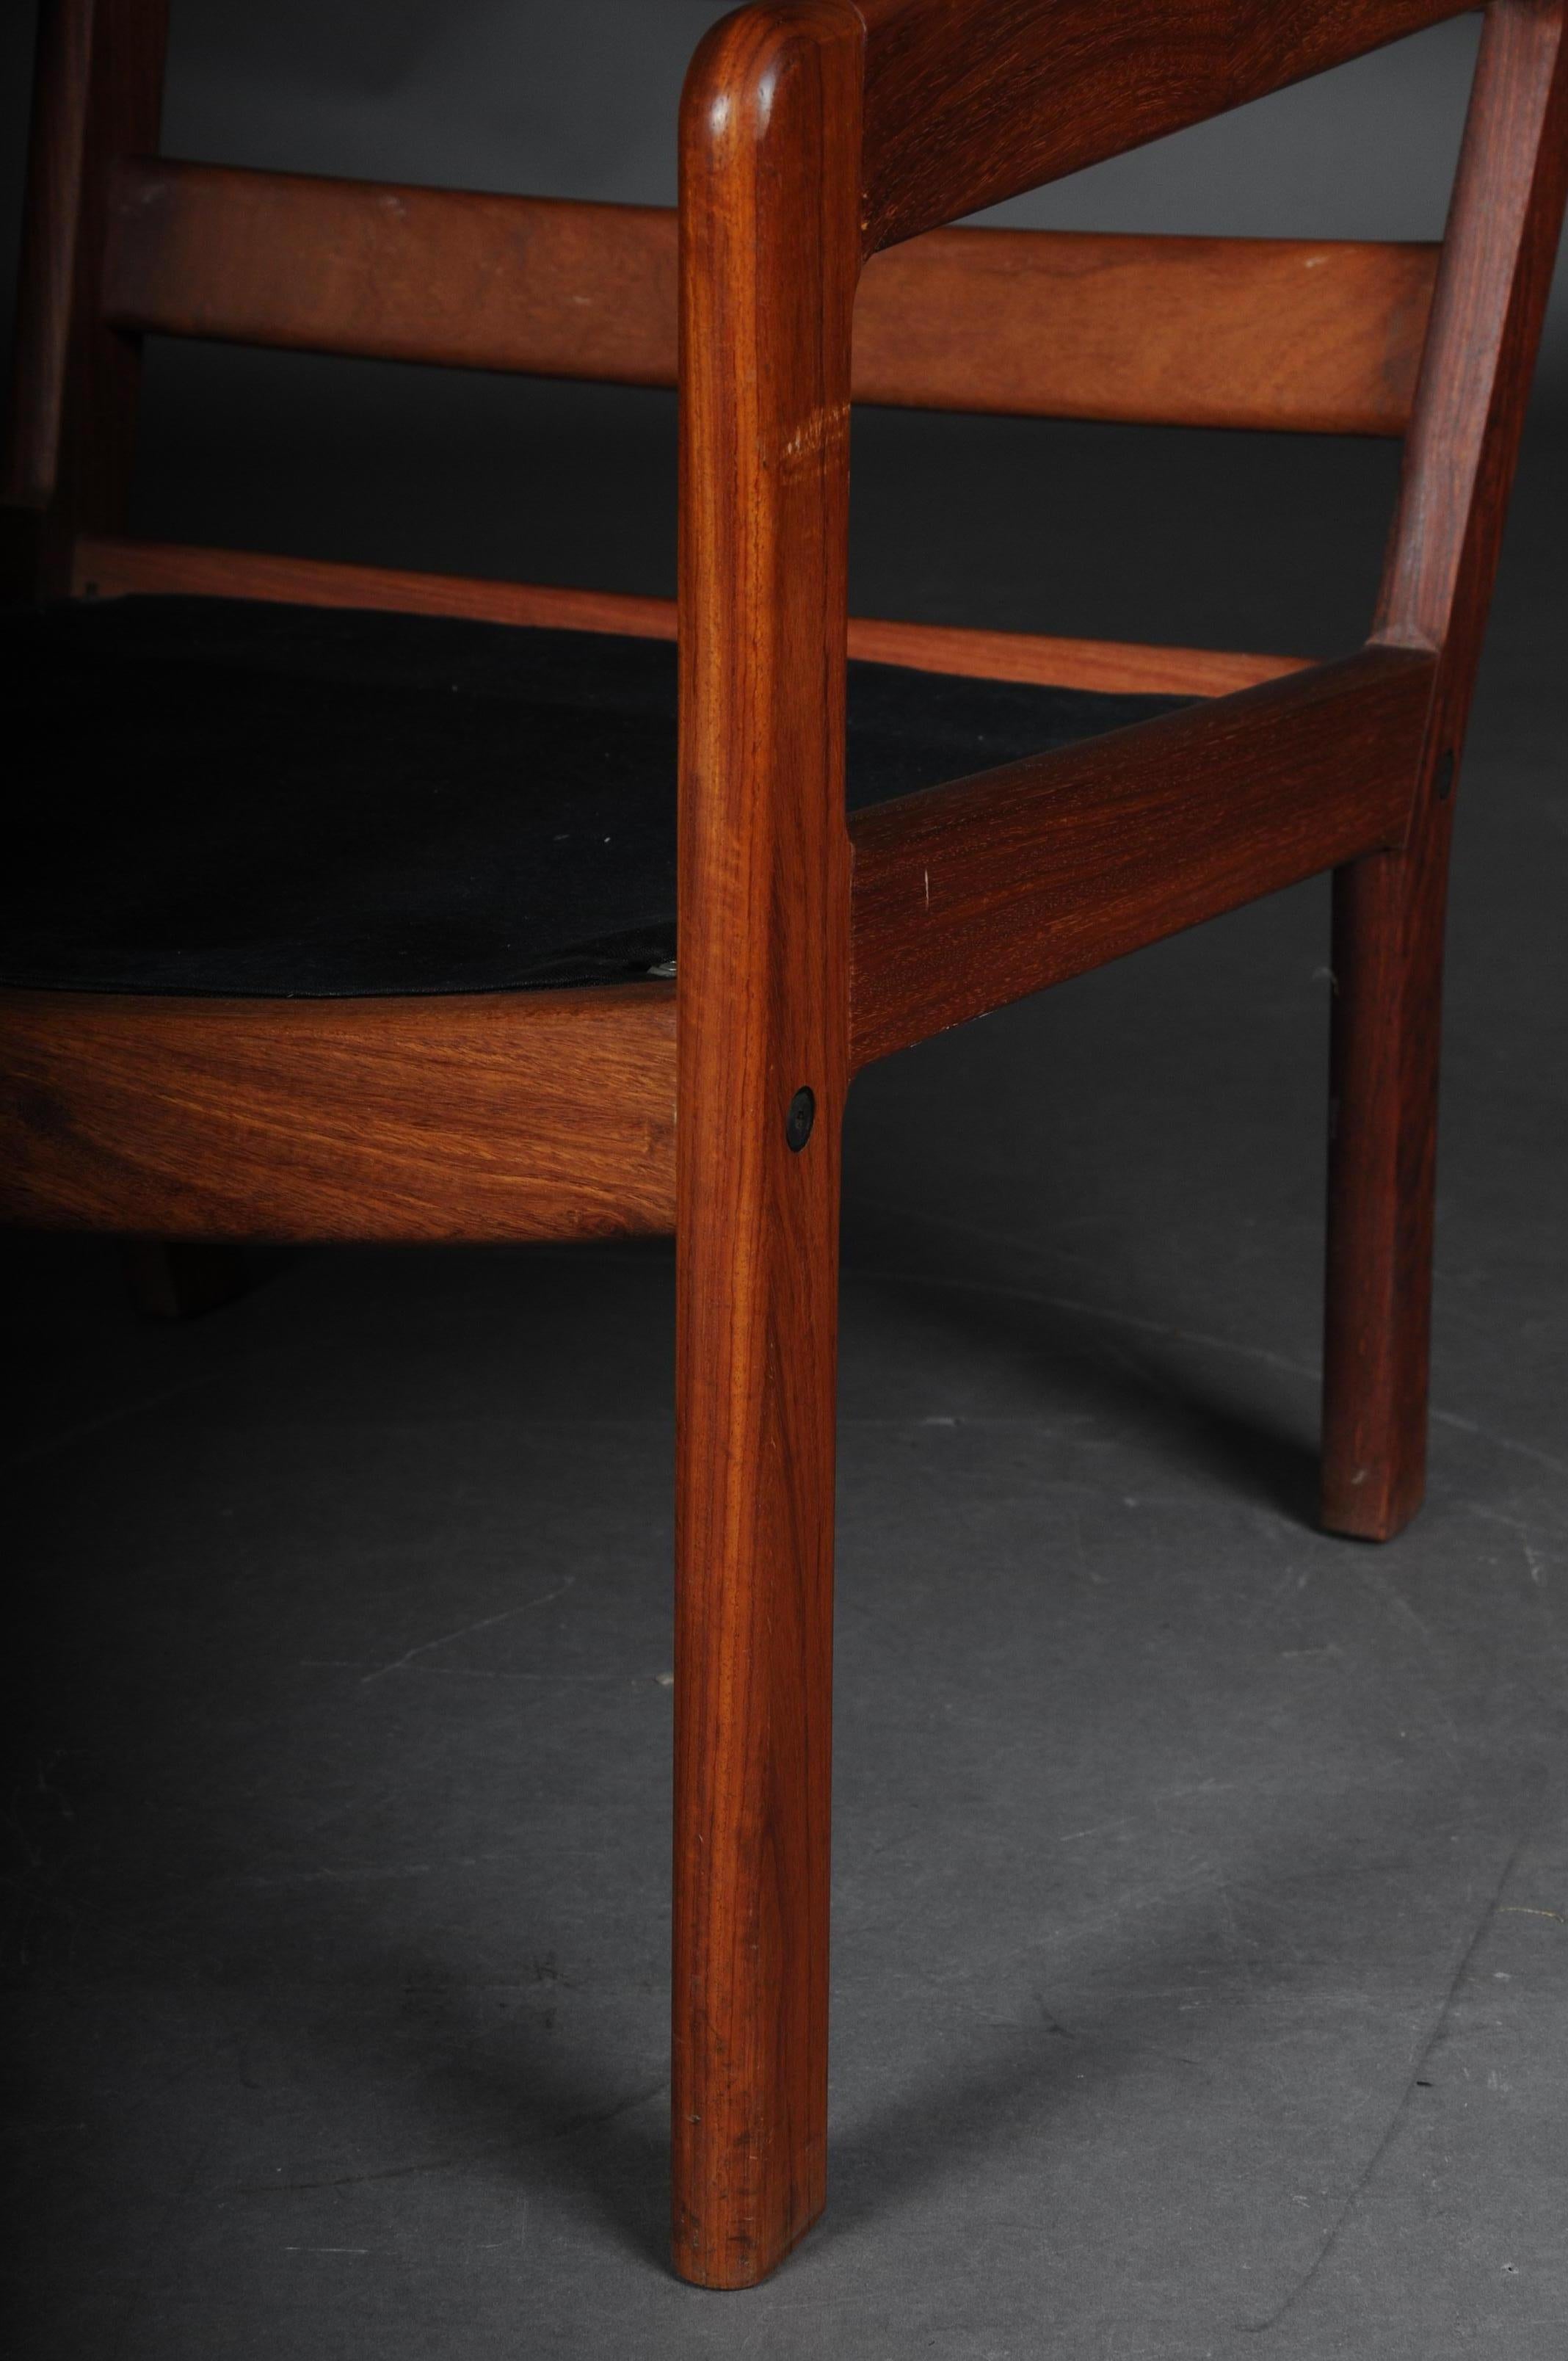 Pair of Vintage Teak Armchairs, Chairs, 1960s-1970s, Danish For Sale 8